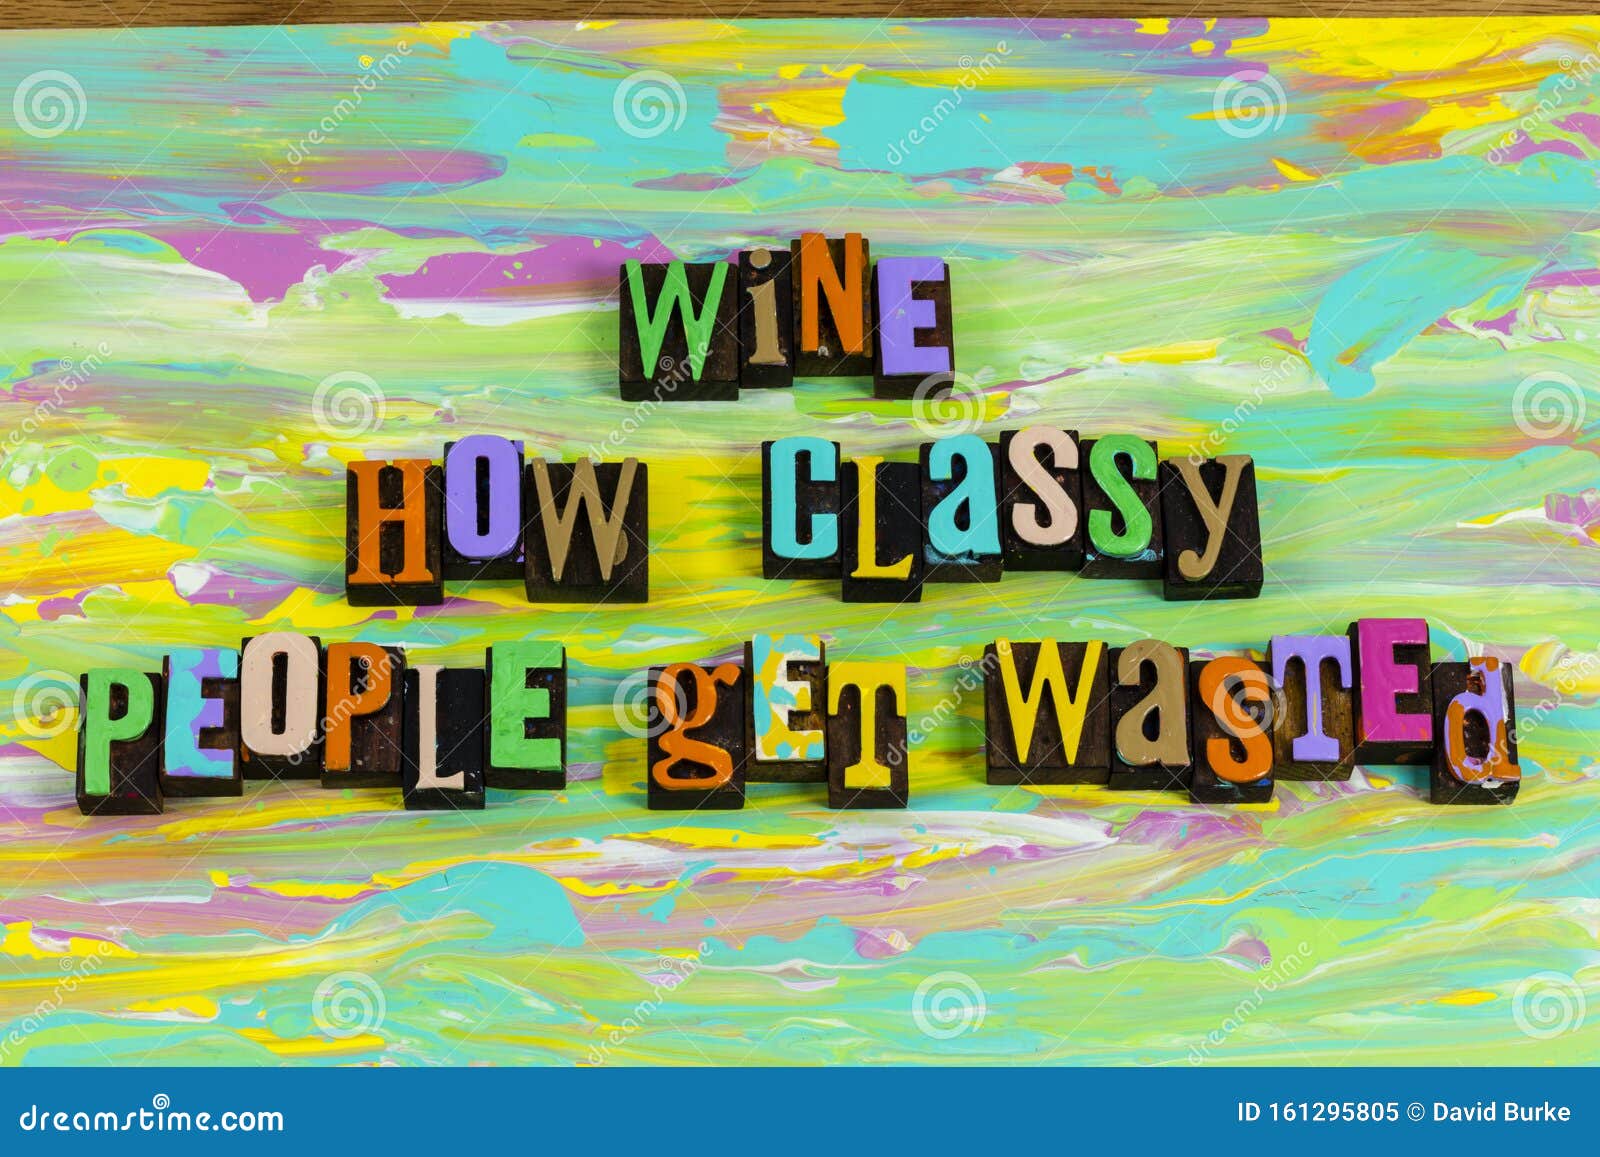 wine beer classy people wasted drunk social drinking